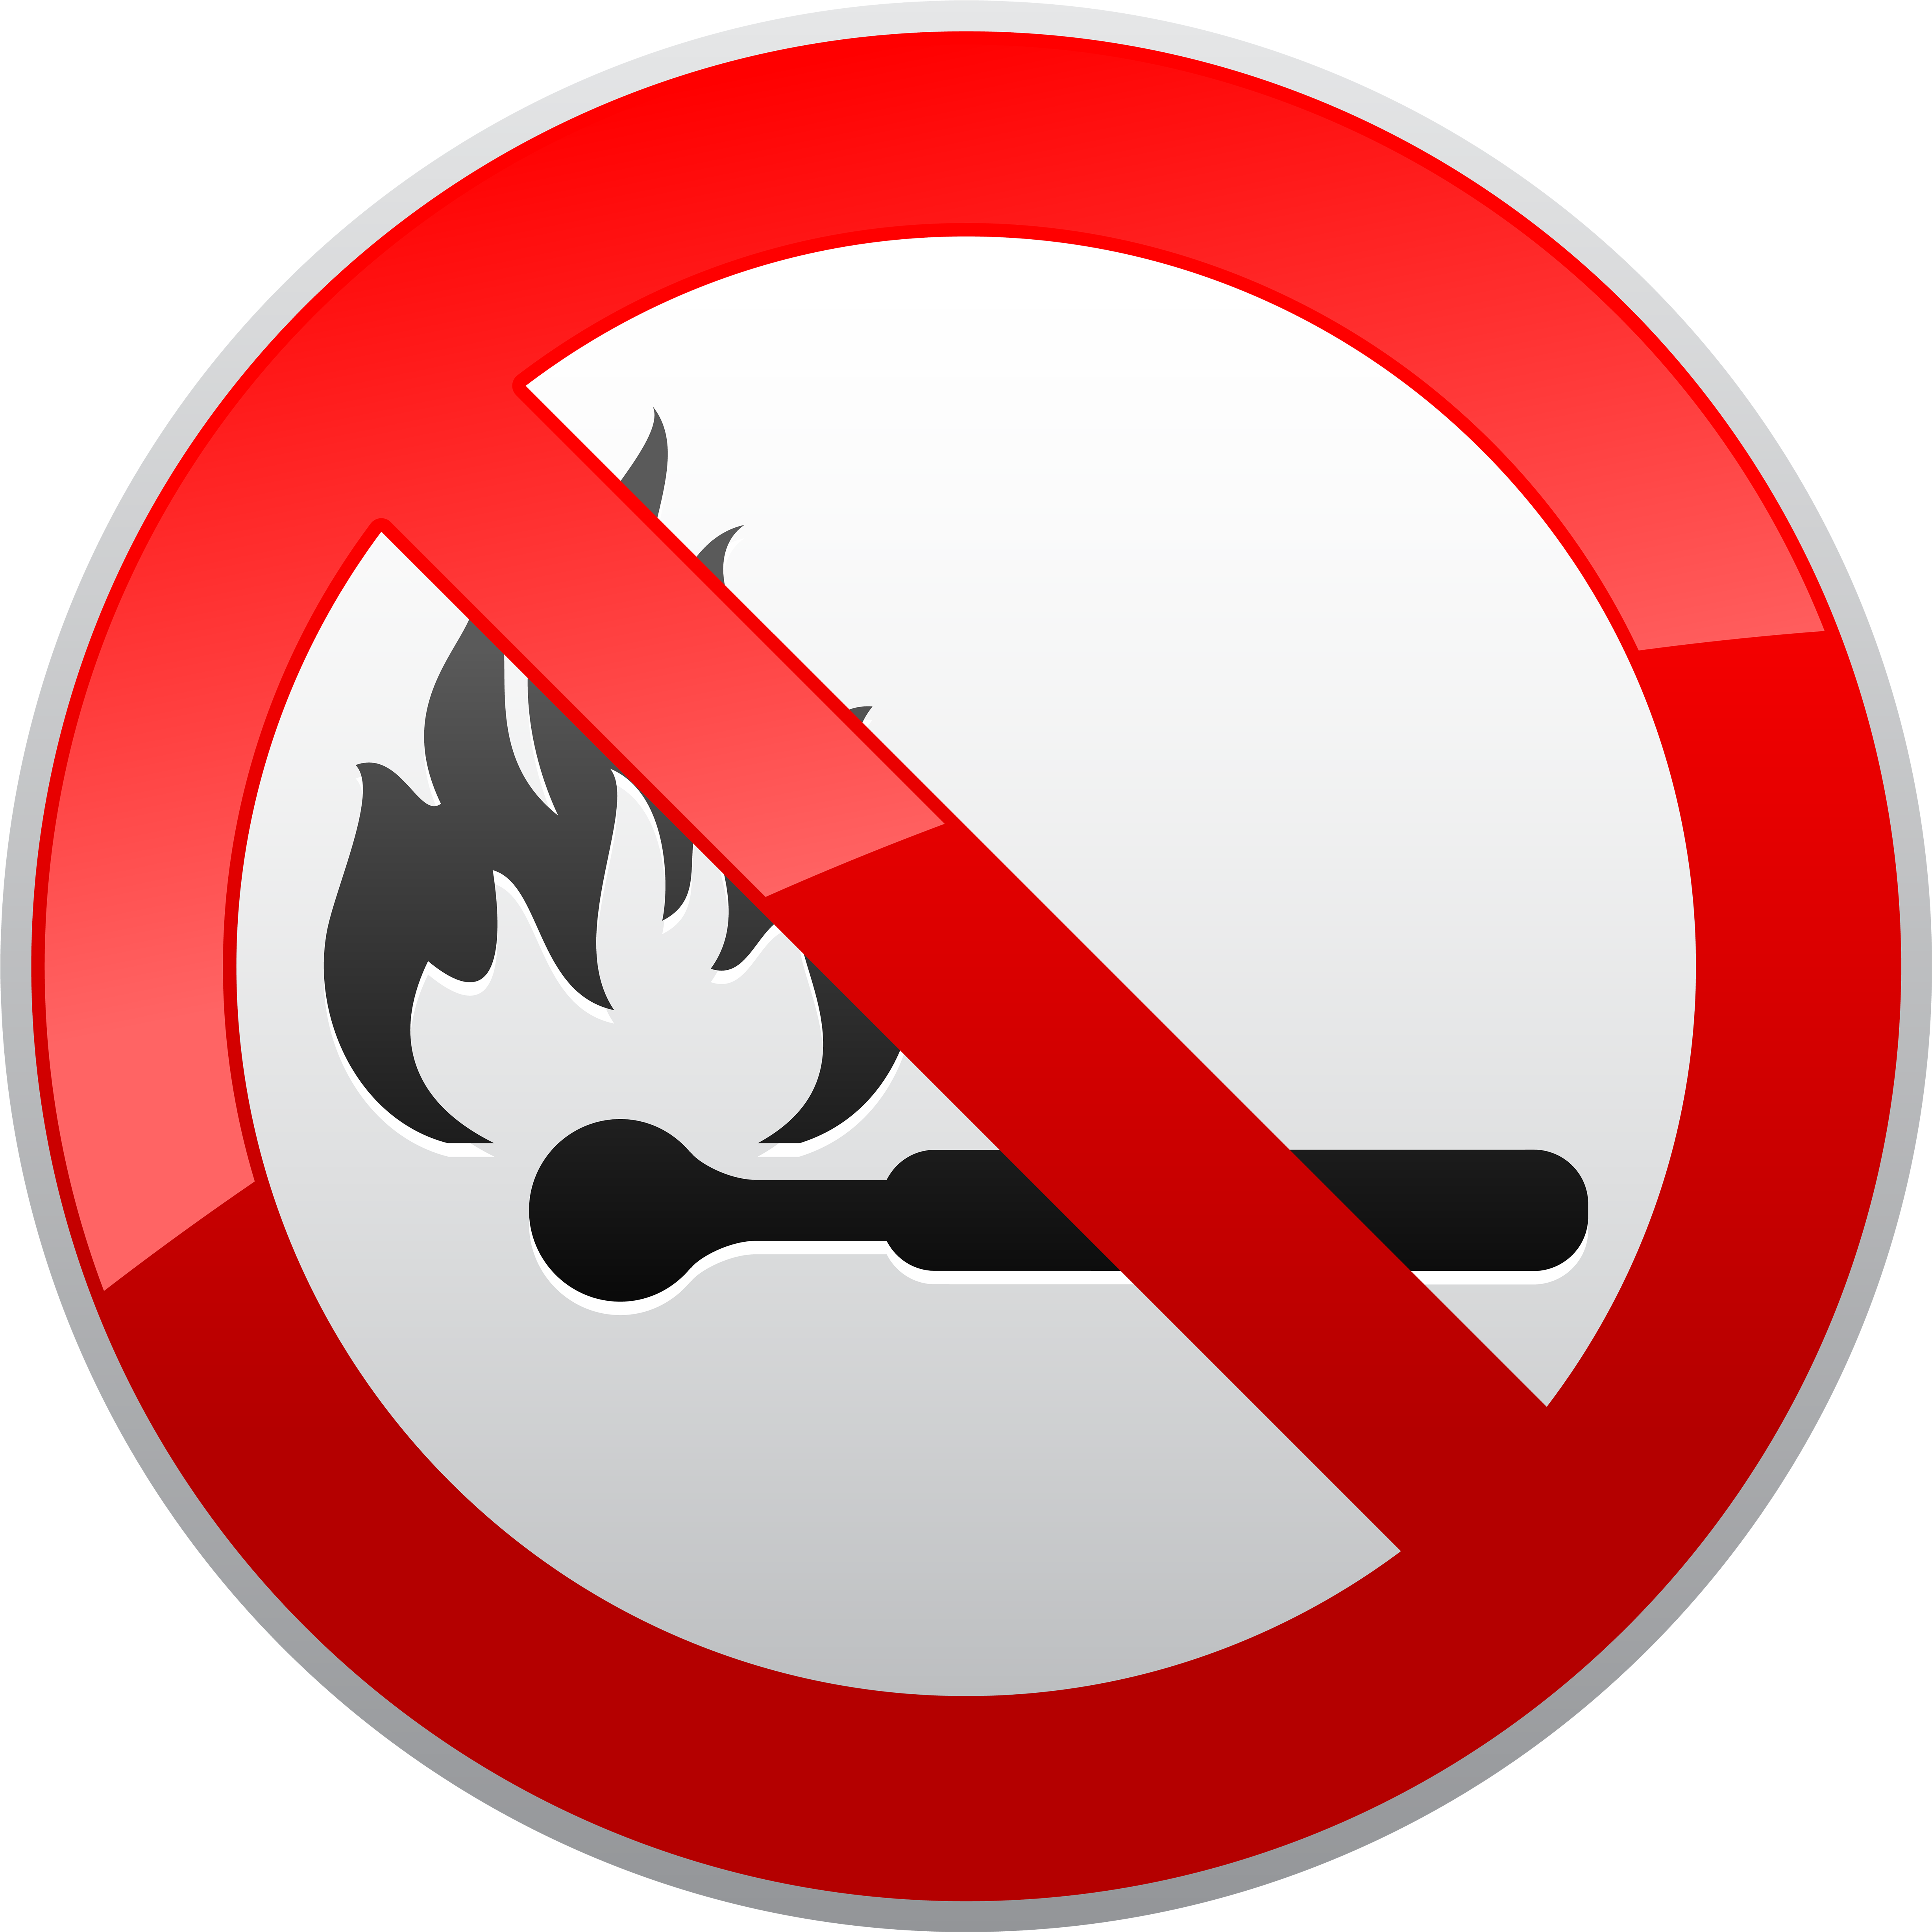 FIRE NAKED FLAME AND SMOKING PROHIBITED | Shop - Safety Genius